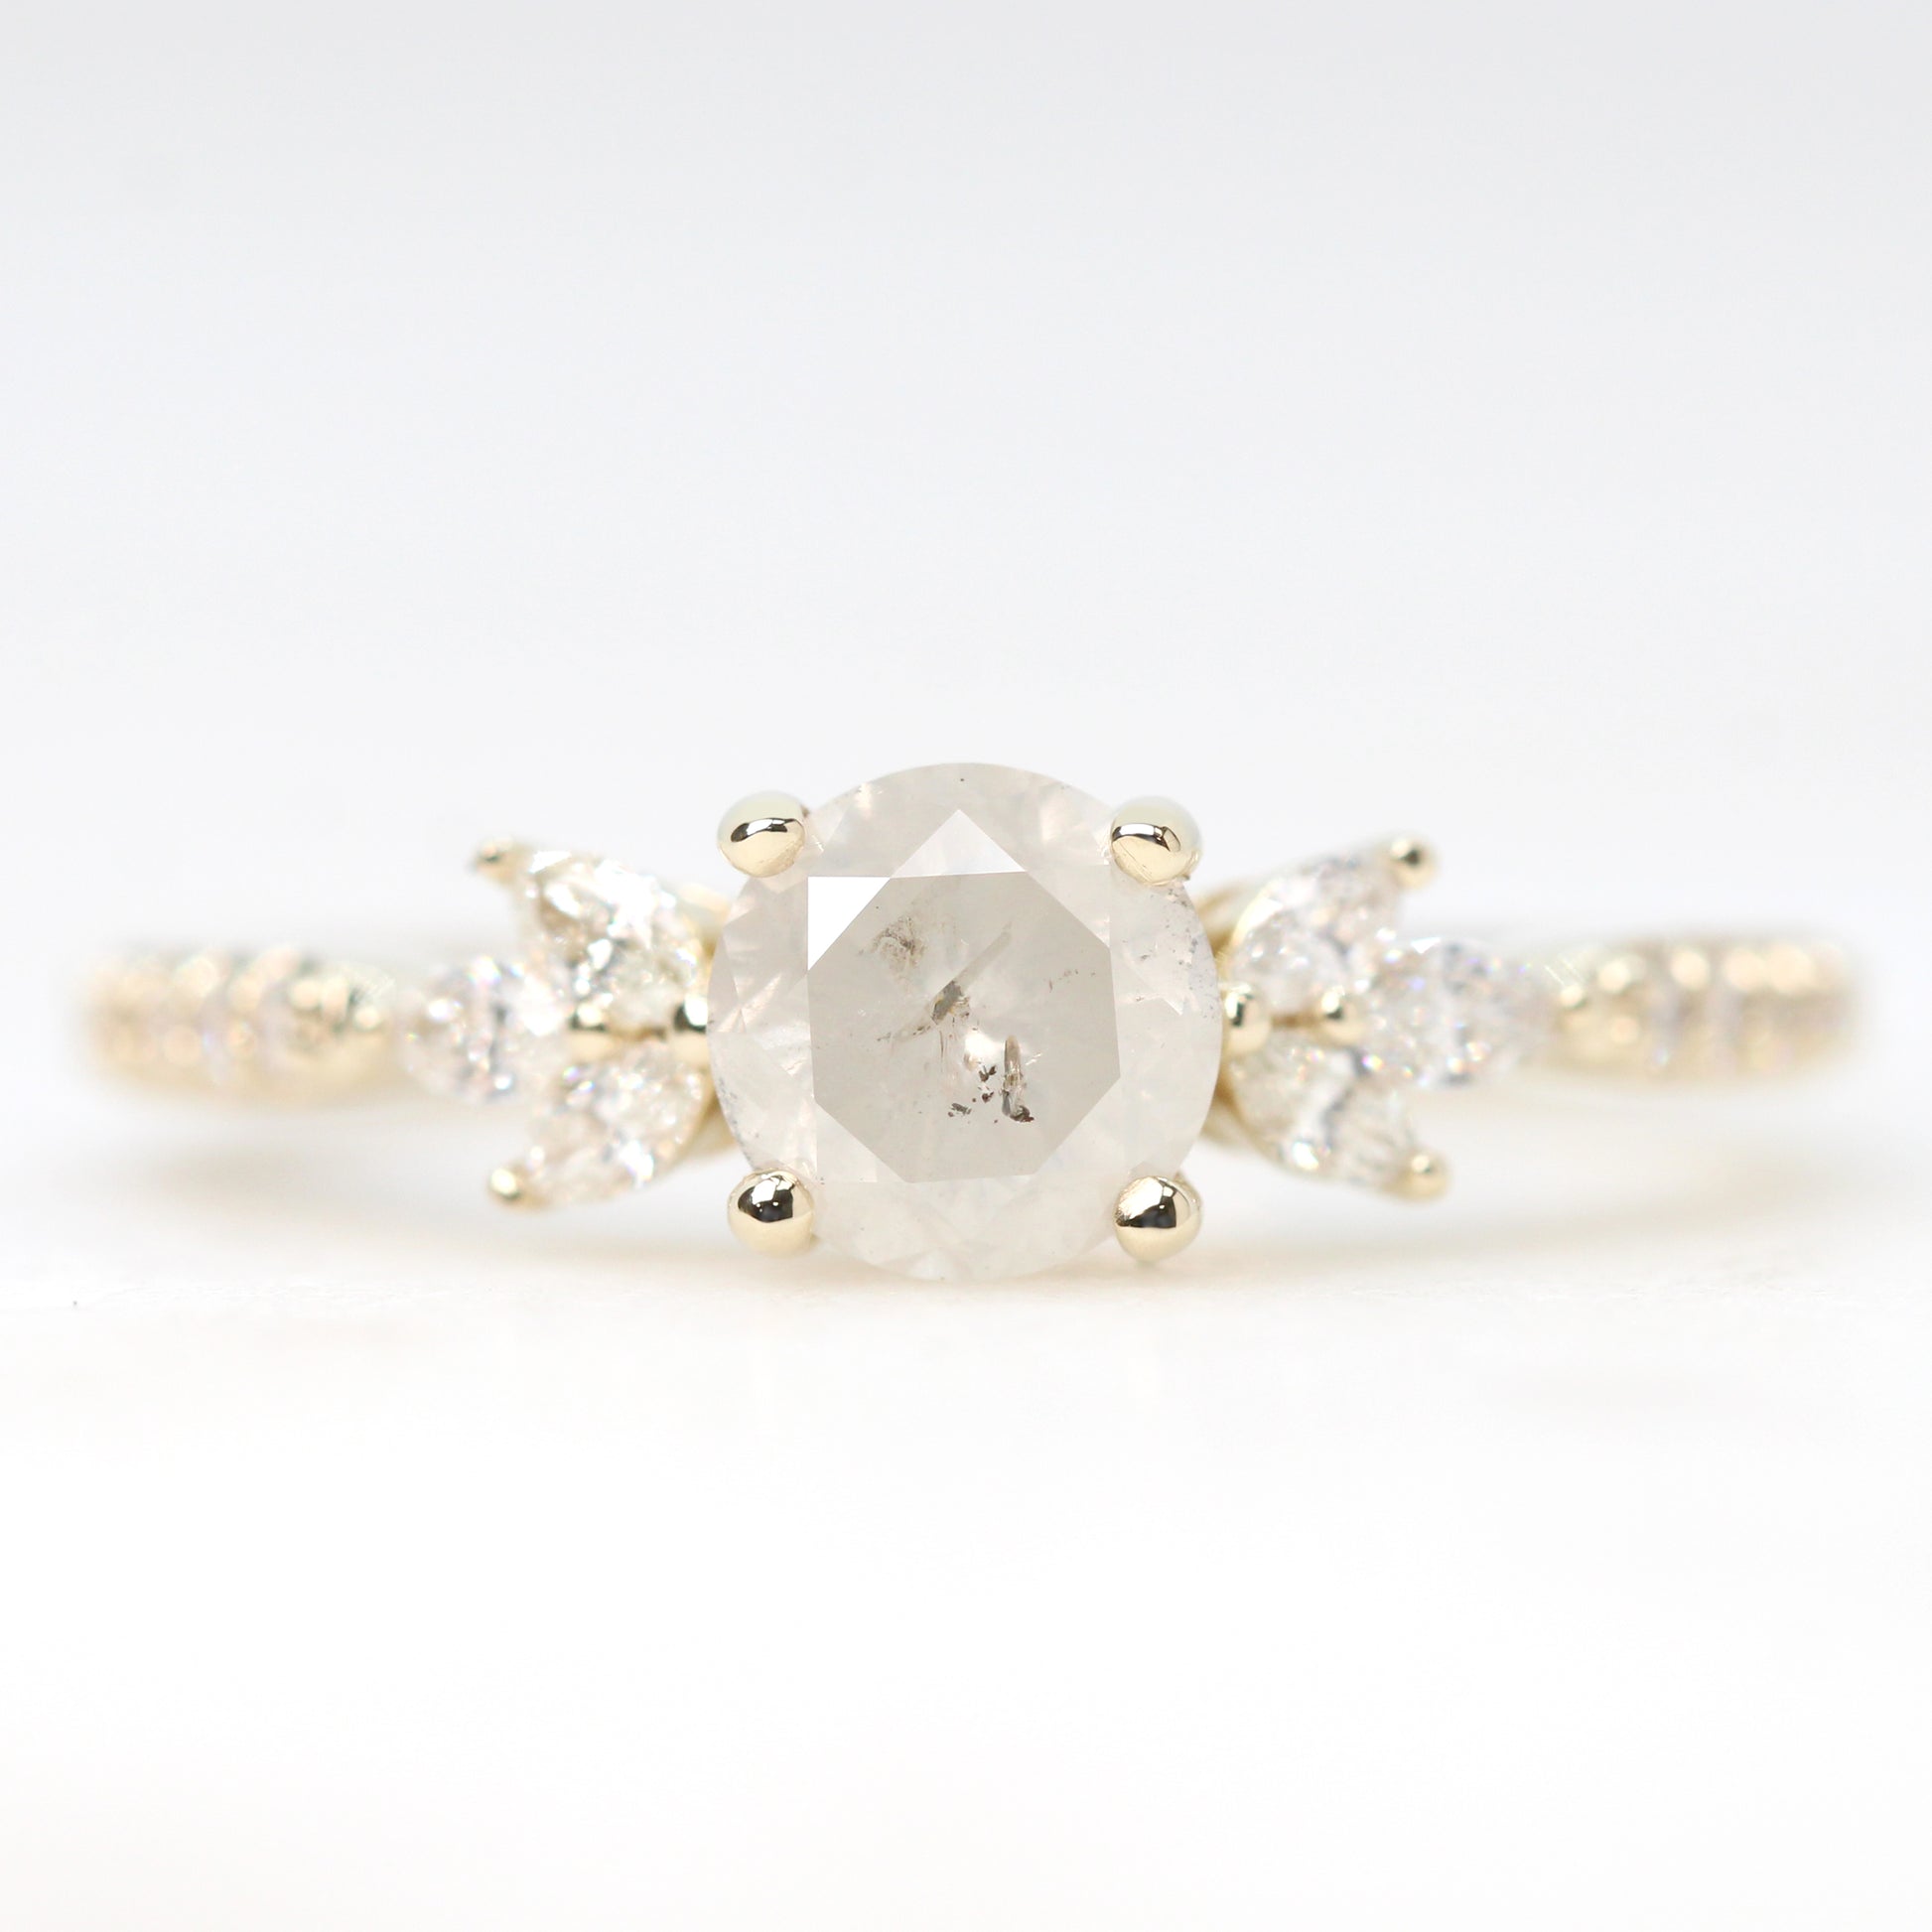 Betty Ring with a 0.97 Carat Round Misty White Salt and Pepper Diamond and White Accent Diamonds in 14k Yellow Gold - Ready to Size and Ship - Midwinter Co. Alternative Bridal Rings and Modern Fine Jewelry